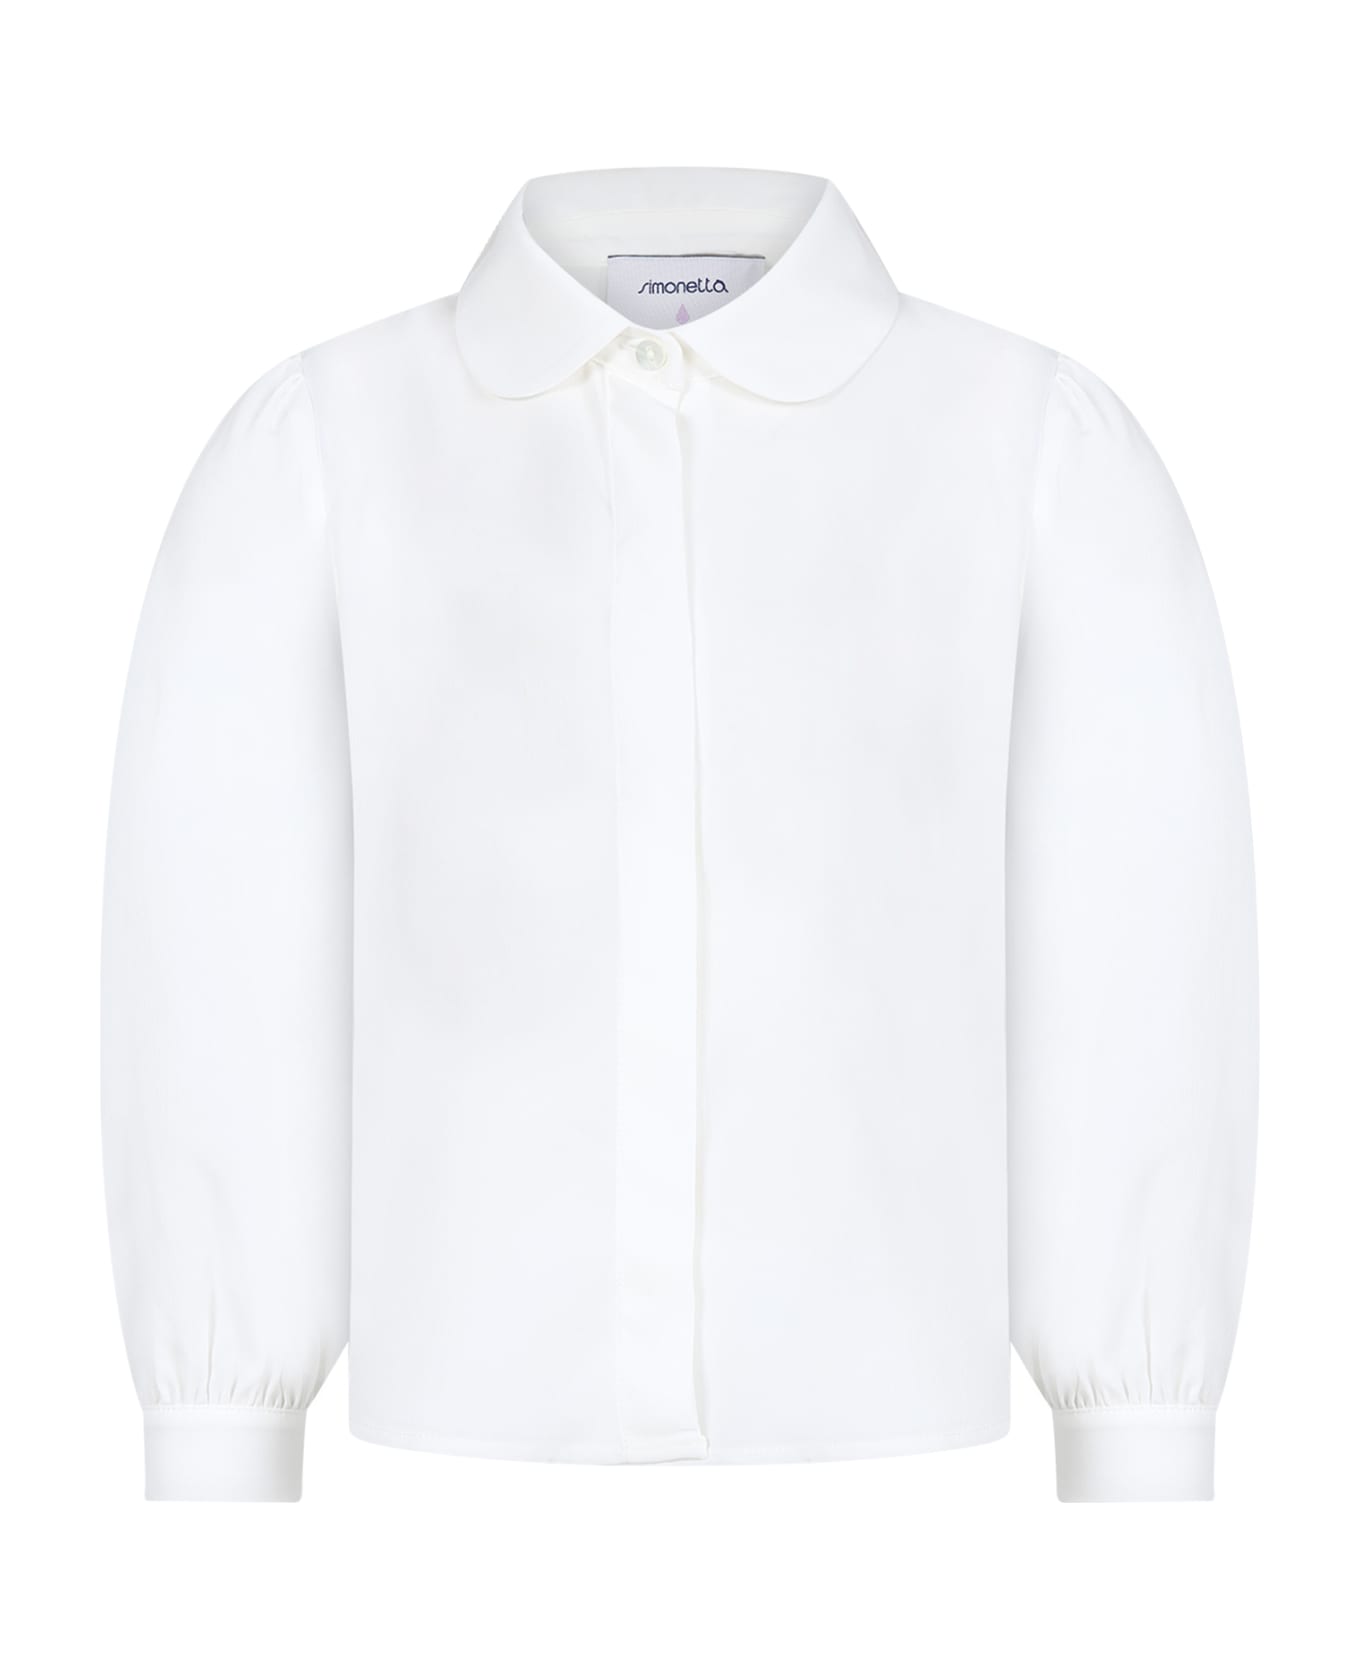 Simonetta White Shirt For Girl With Bow - ivory/pink